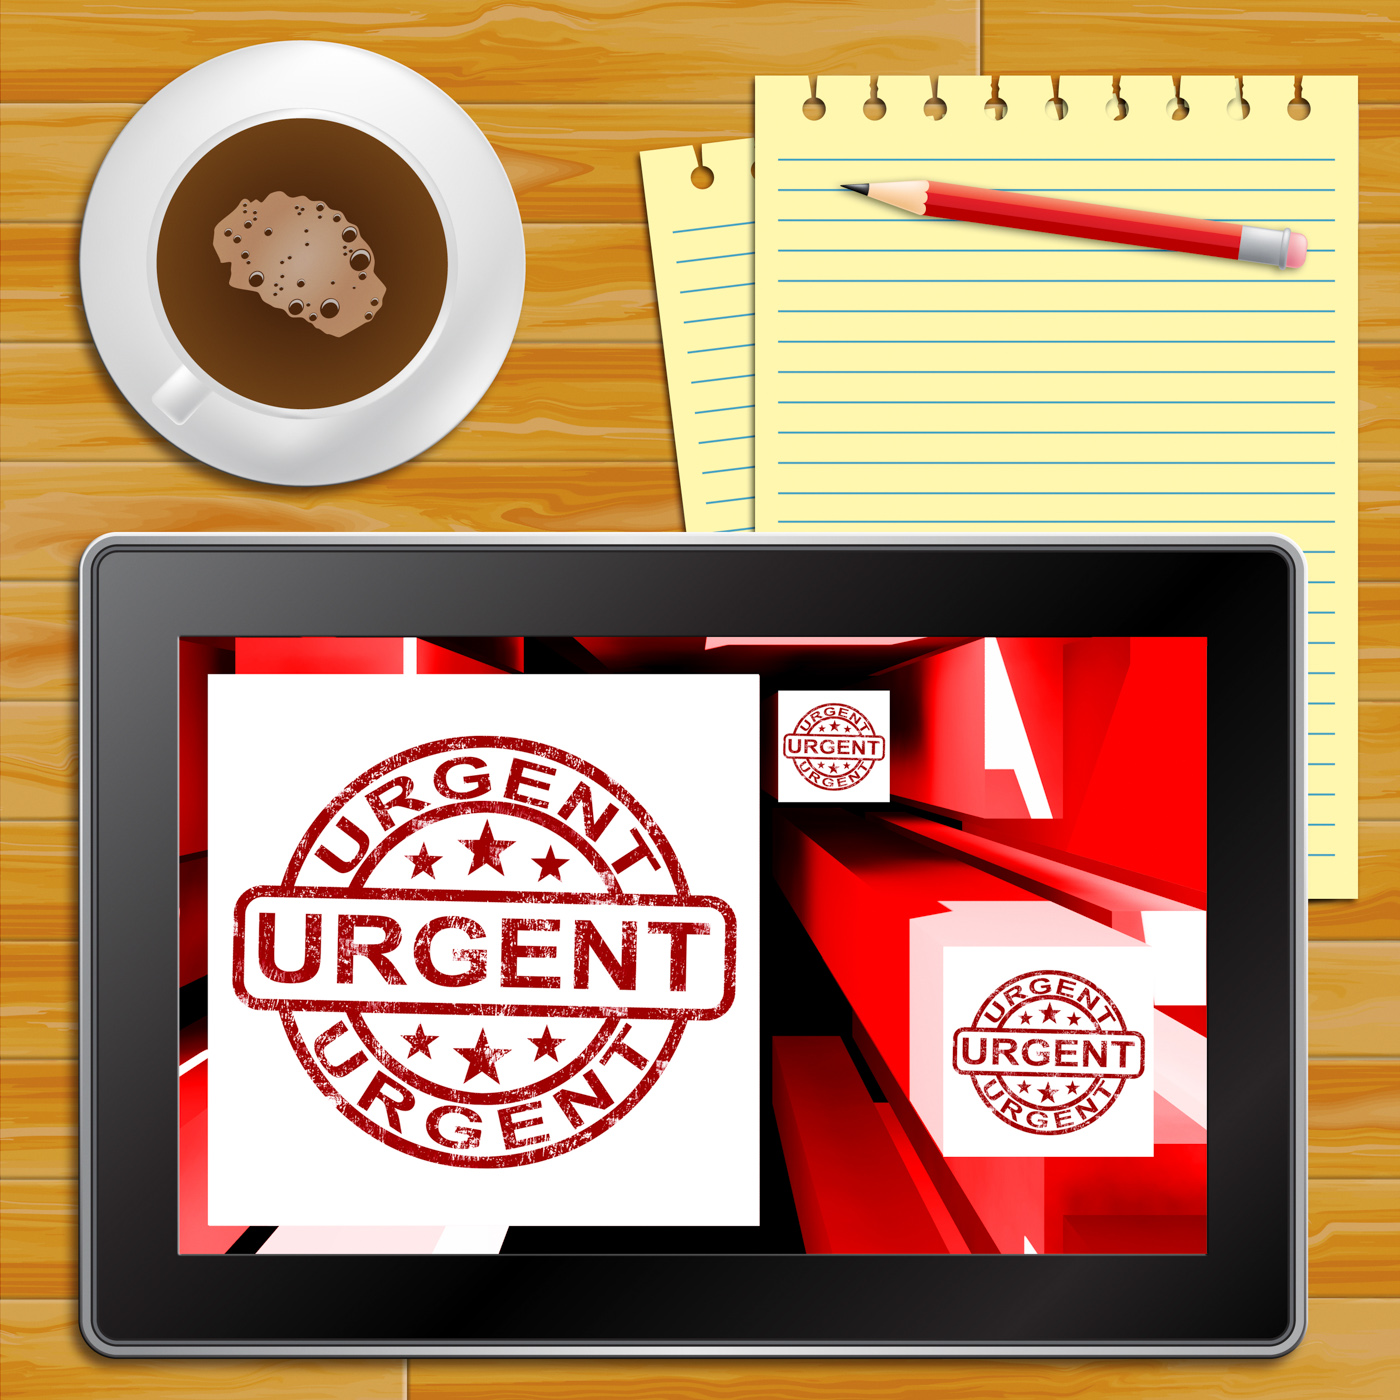 Urgent on cubes shows urgent priority tablet photo